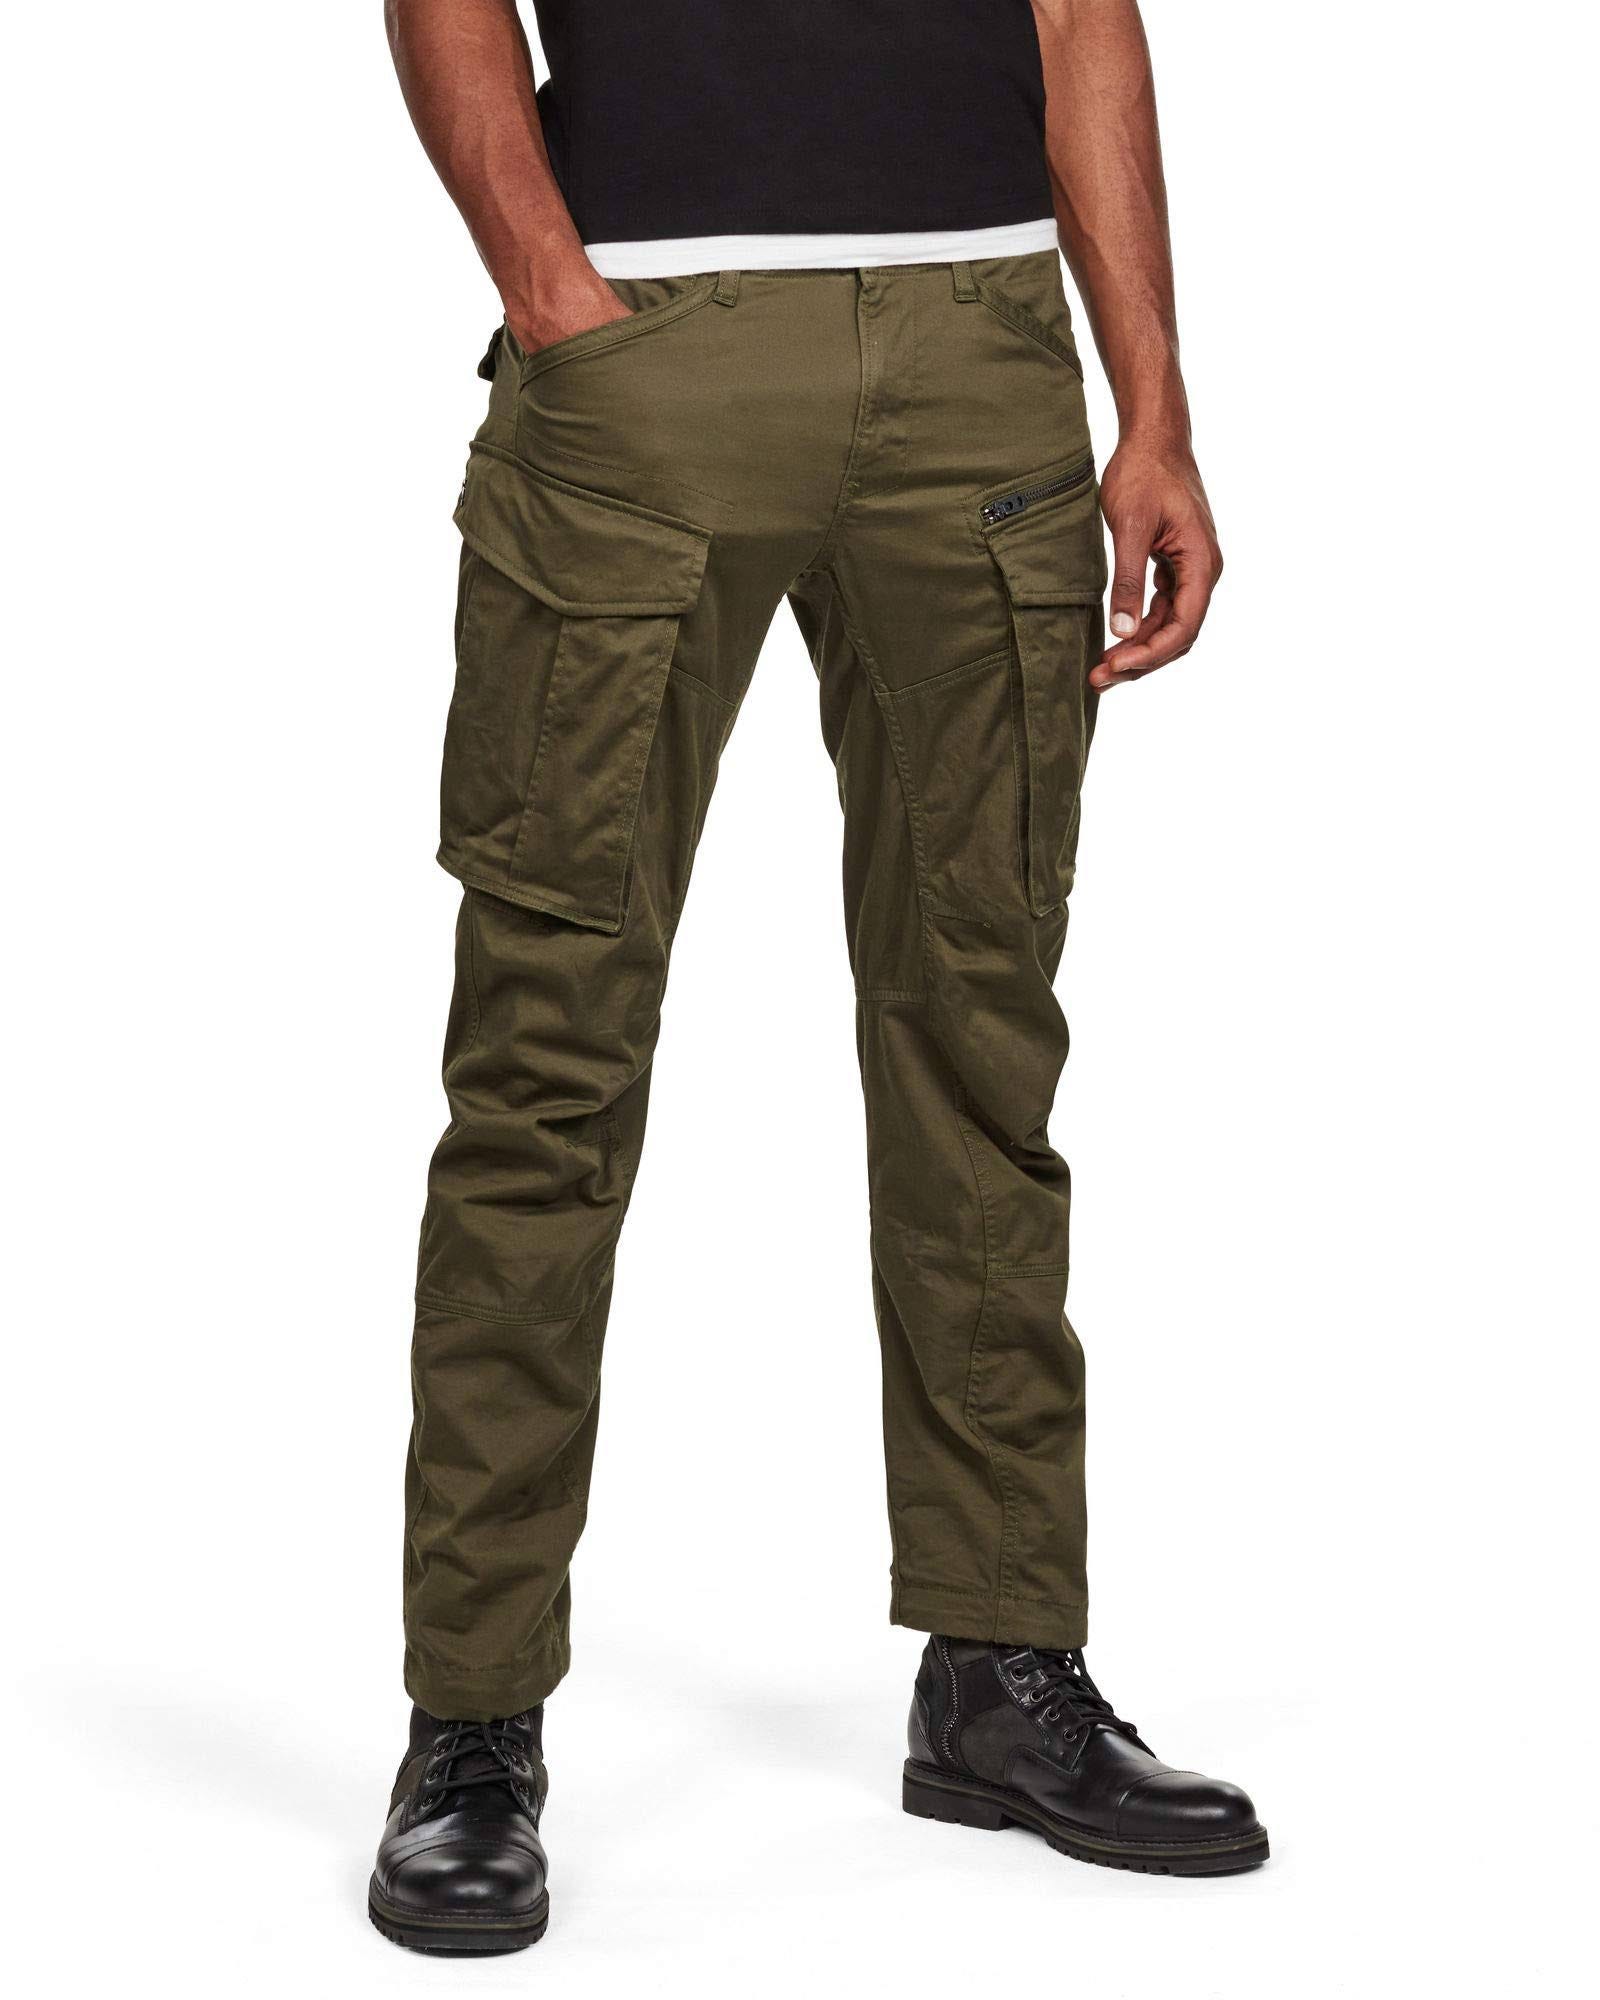 Khaki Cargo Pants with Tapered Fit - G-Star Rovic Zip 3D | Image